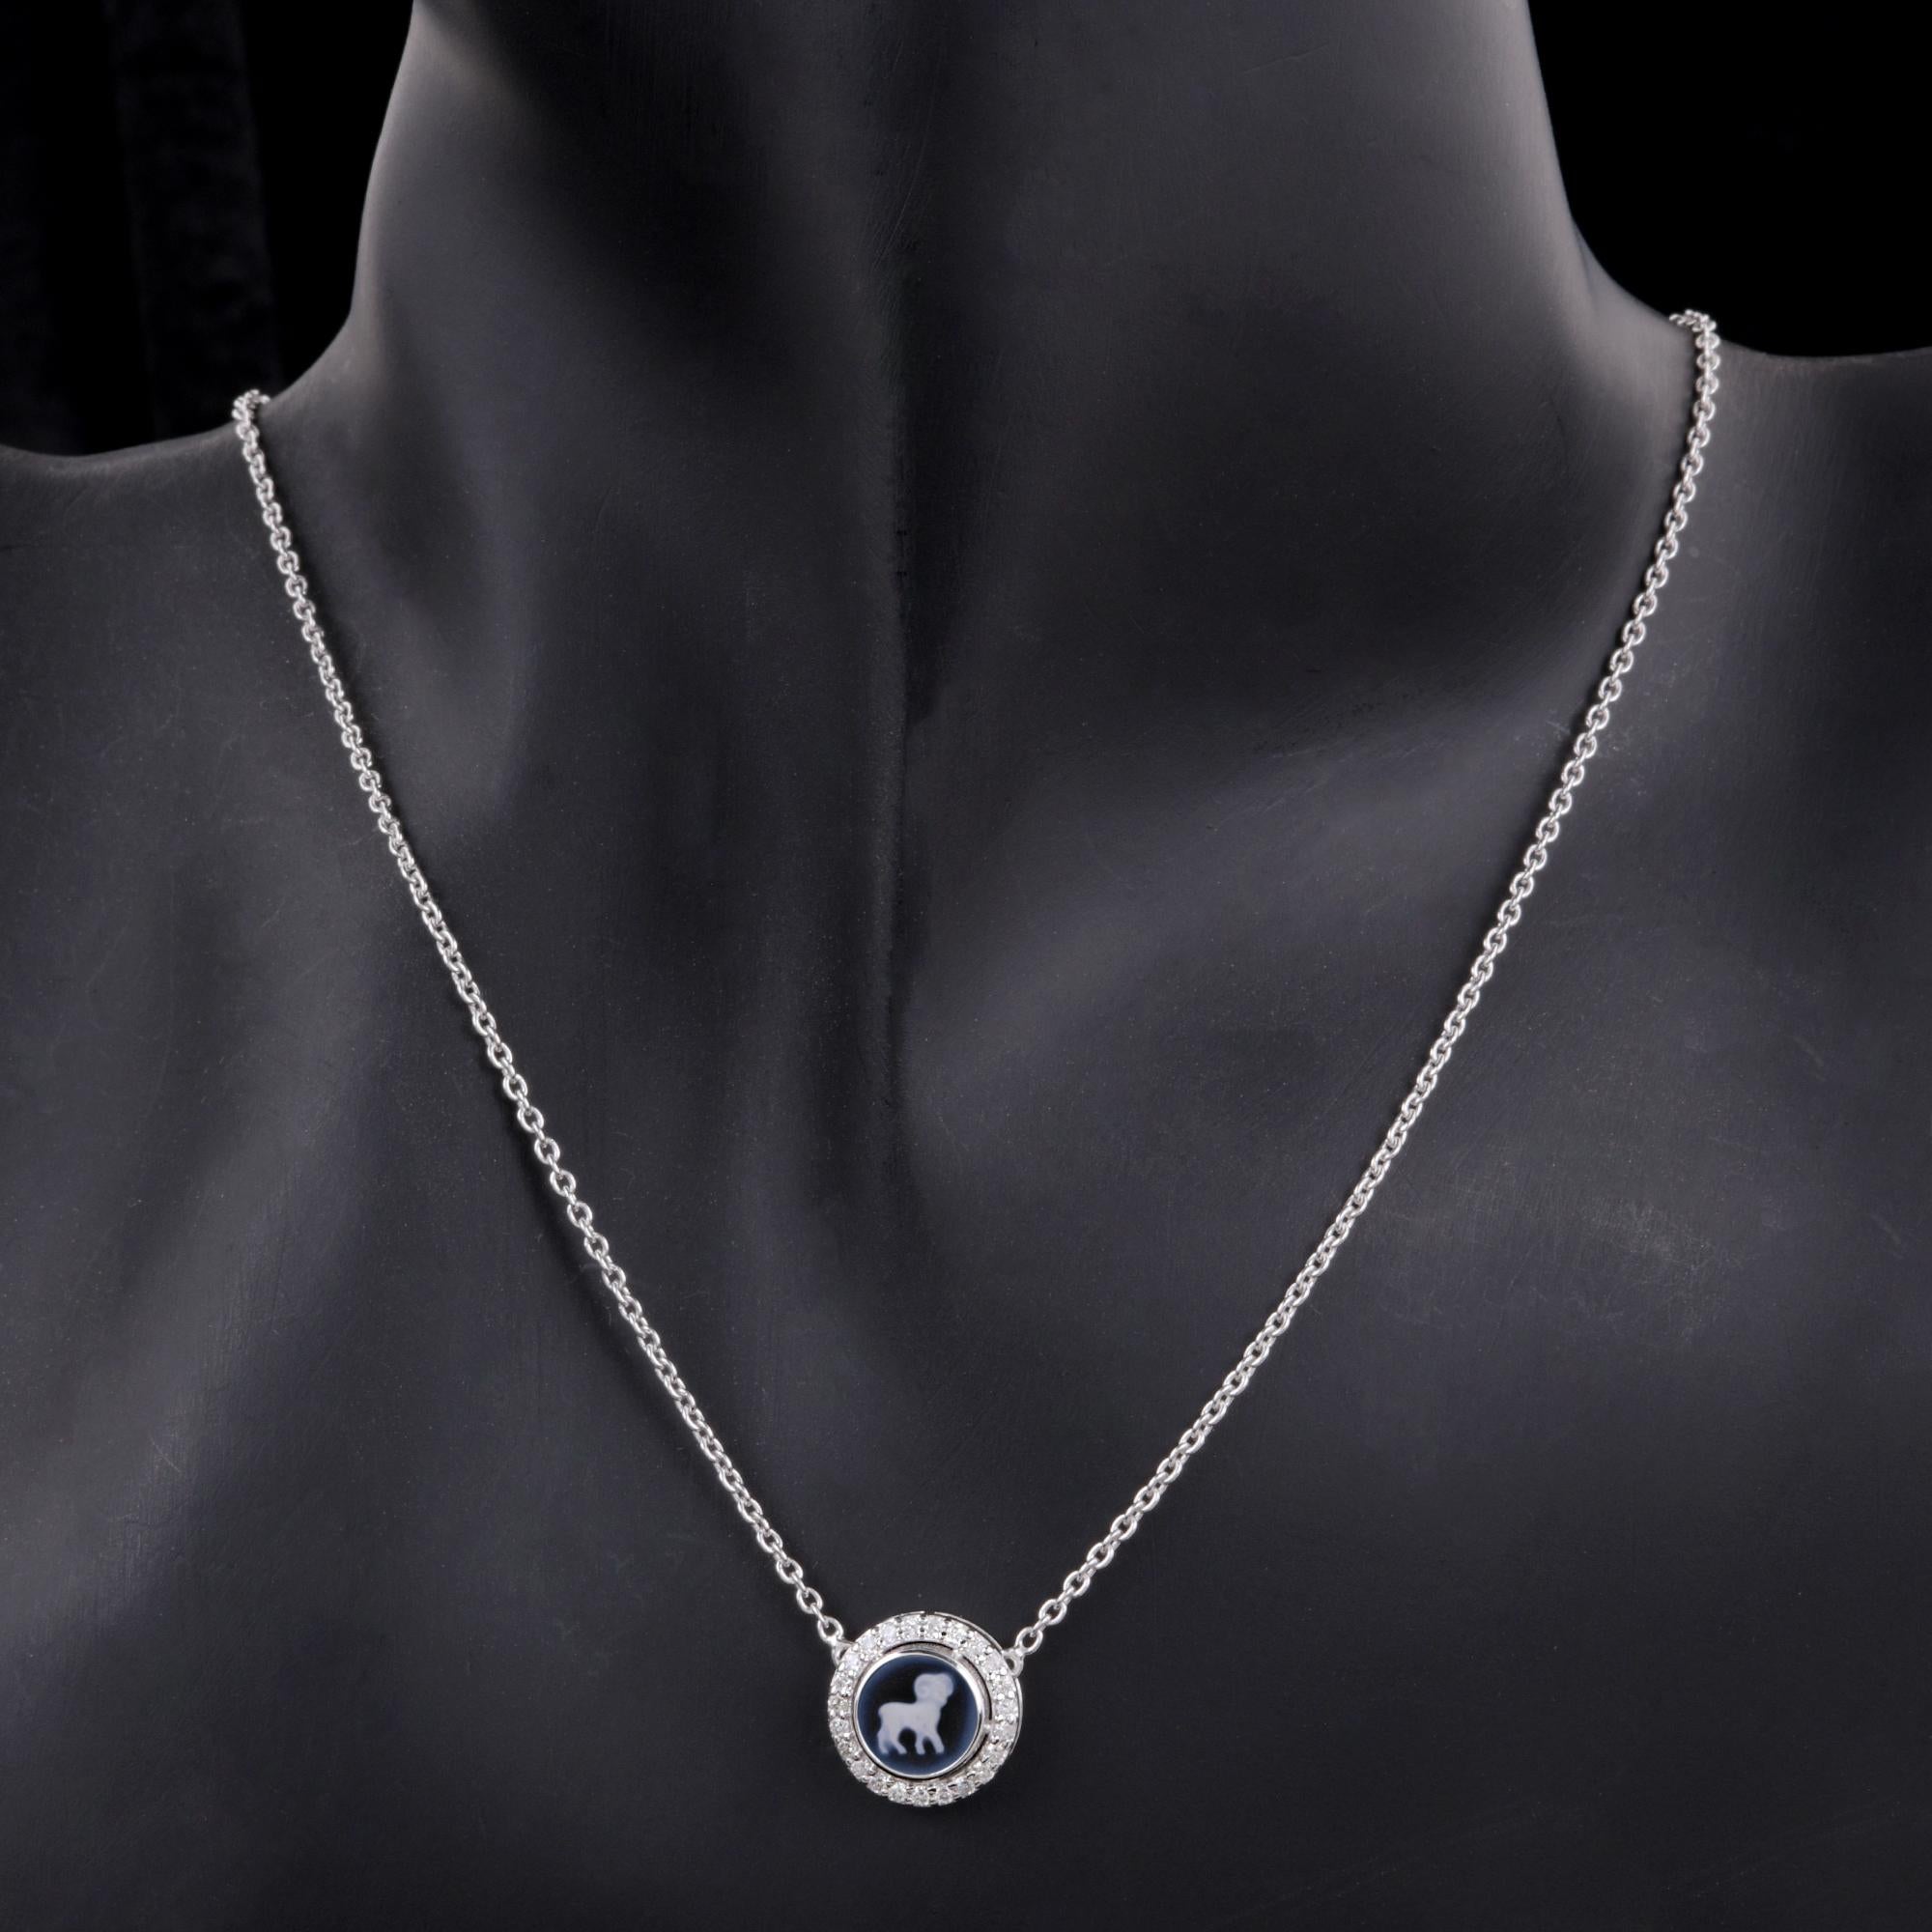 Modern Aries Horoscope Sign H/SI Pave Diamond Pendant 14k White Gold Necklace 1.12 Tcw For Sale